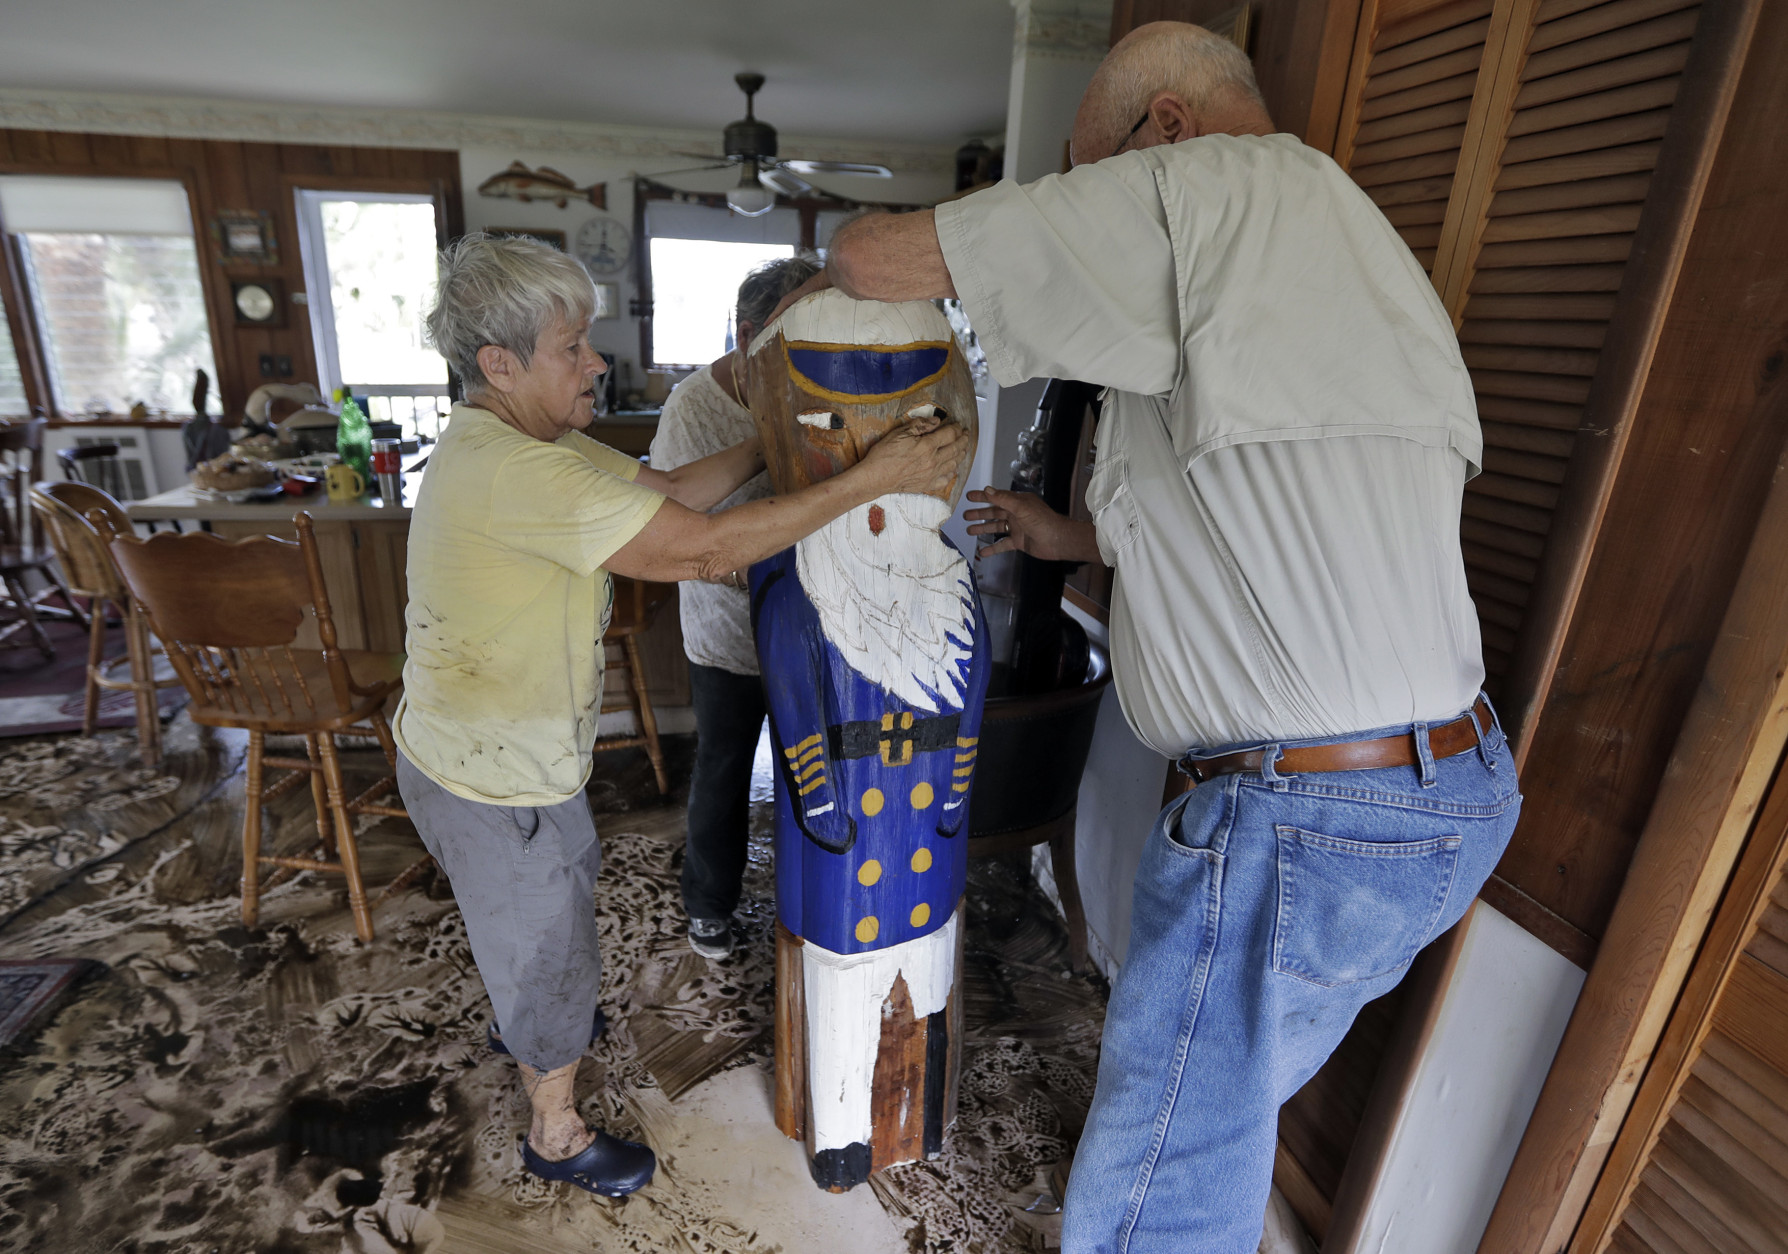 Bobbi Pattison, left, with help from her neighbors Hugh and Harriet Oglesby, stands up a sea captain statue carved out of wood from a 1993 storm at her home Friday, Sept. 2, 2016, in Steinhatchee, Fla. Hurricane Hermine was downgraded to a tropical storm after it made landfall, as it moves over Georgia, but the U.S. National Hurricane Center says winds are increasing along the Southeast coast and flooding rains continue. (AP Photo/Chris O'Meara)